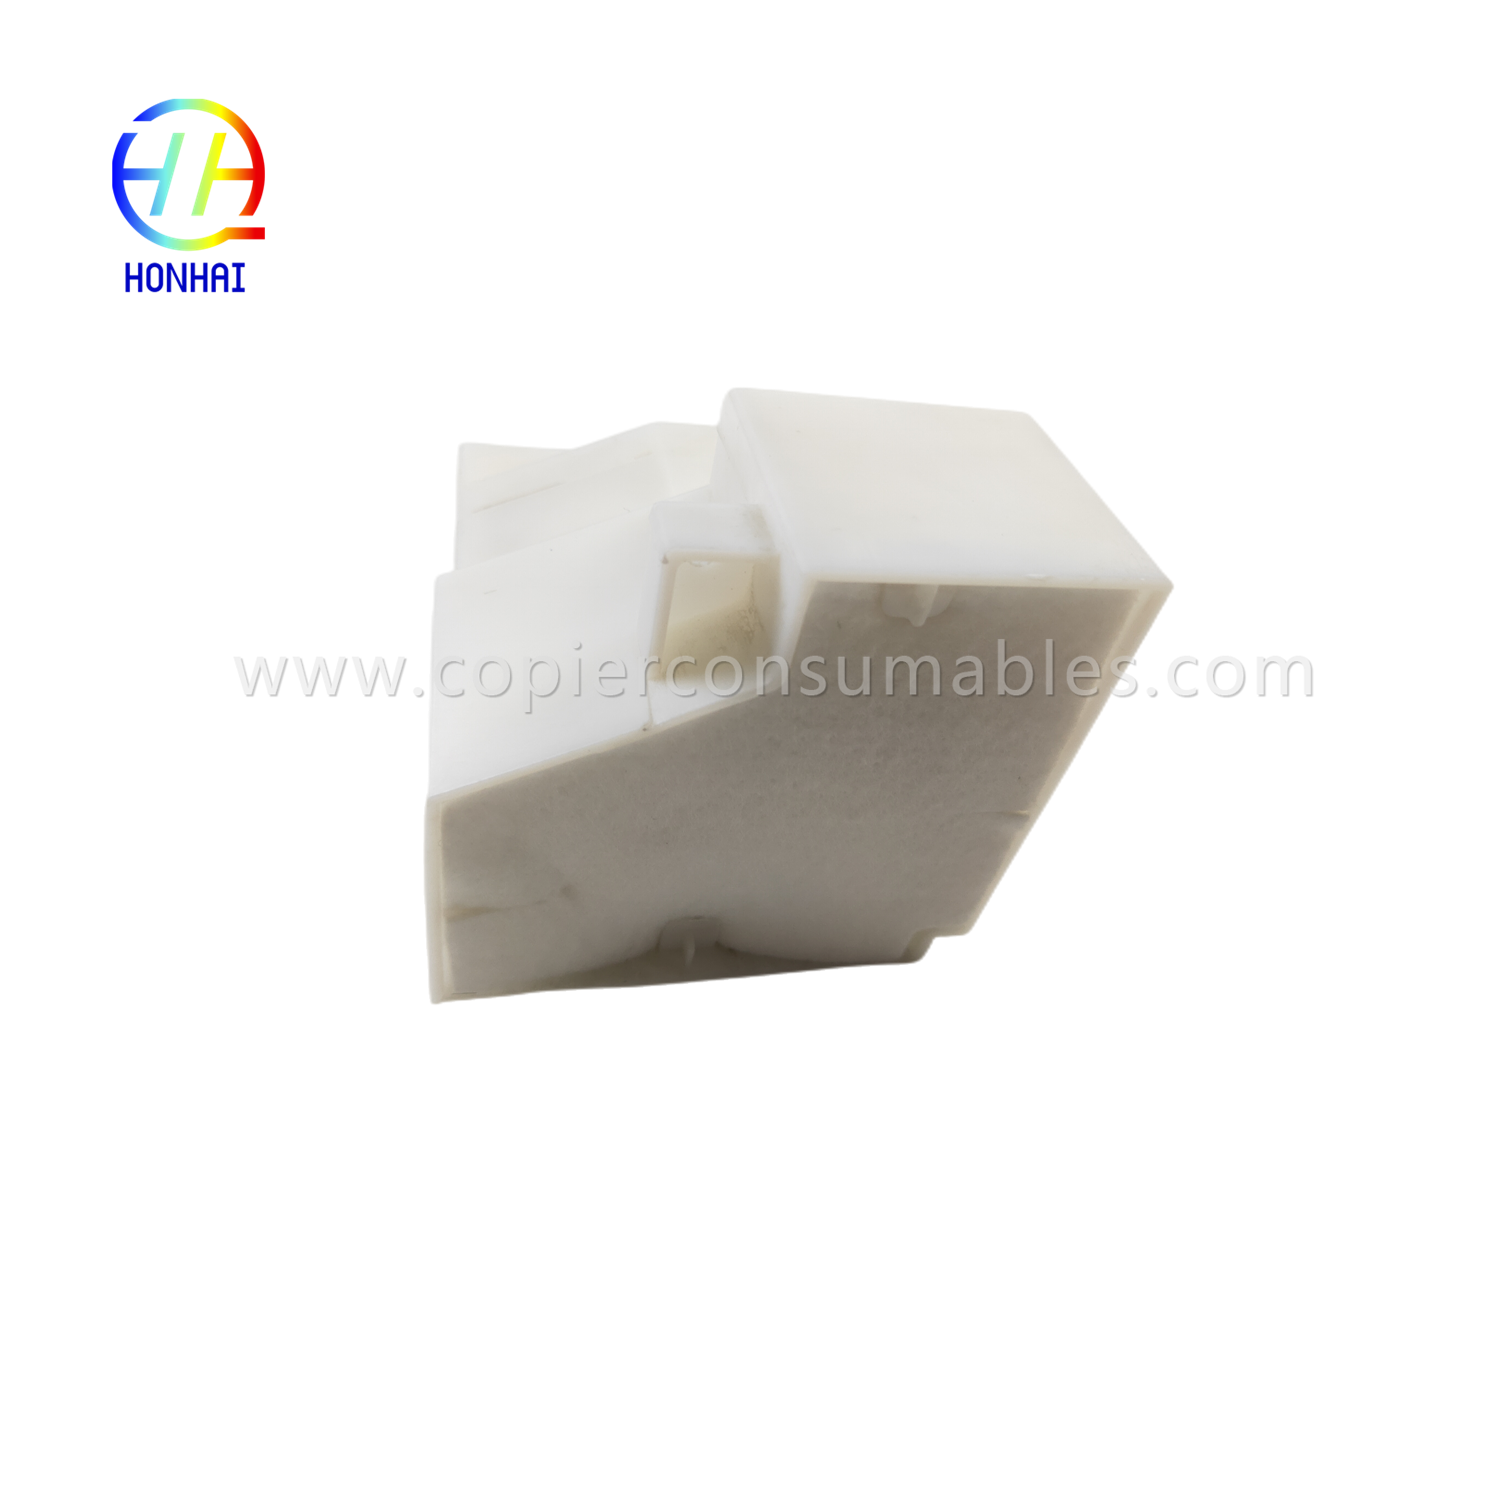 https://c585.goodo.net/waste-ink-pad-for-epson-l800-l805-l810-l850-r280-r290-product/